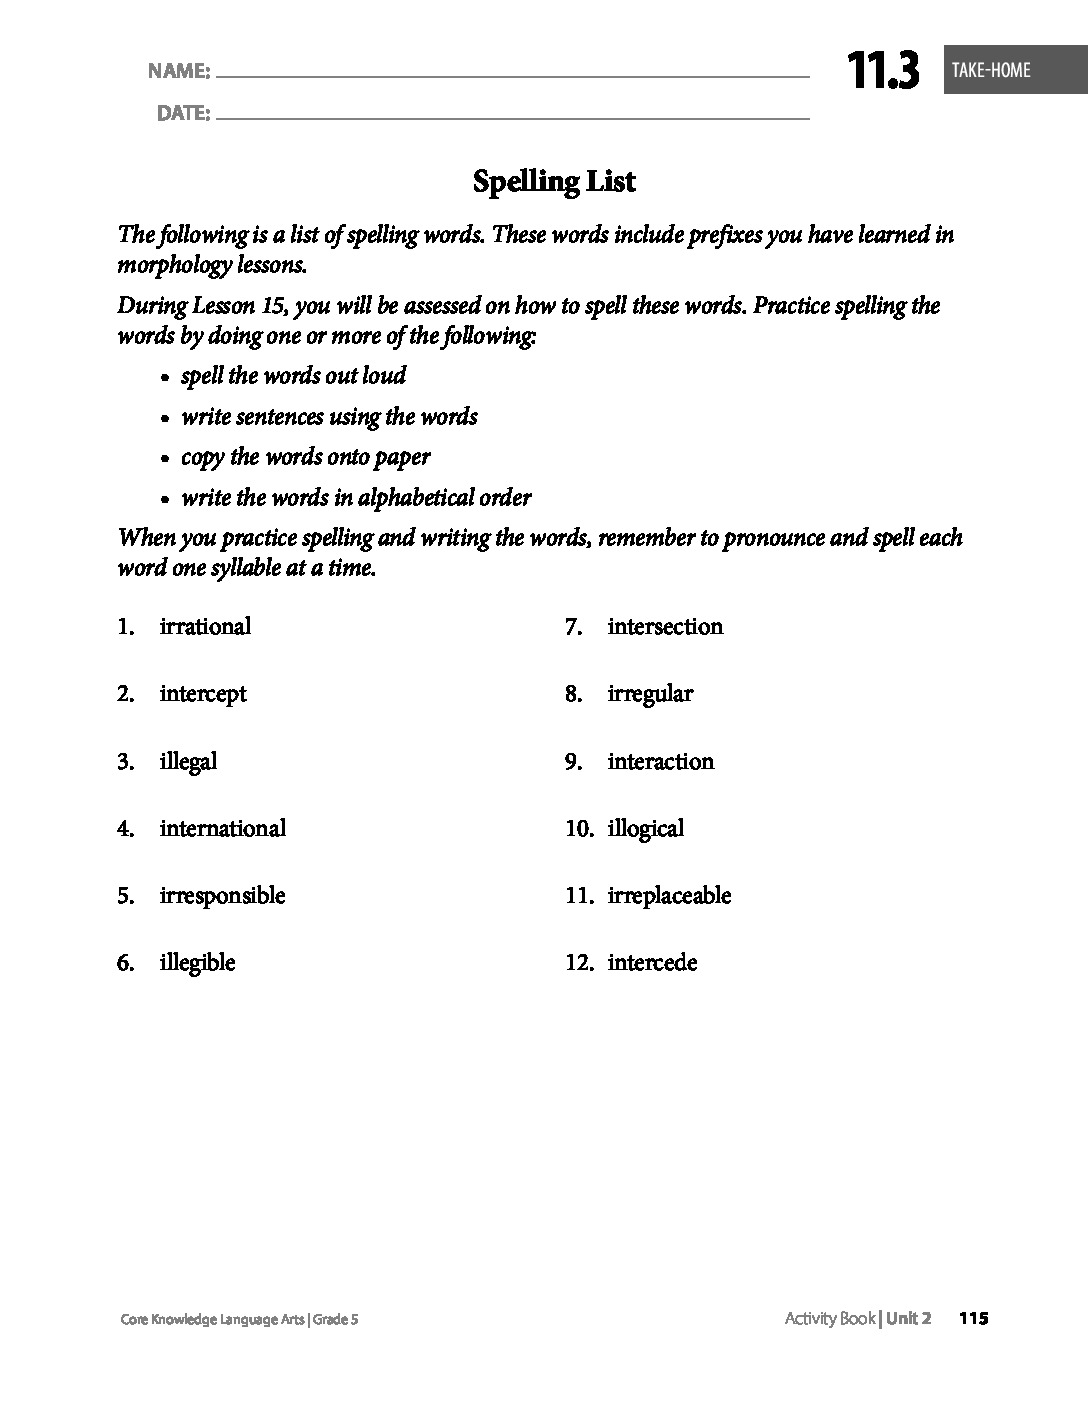 thumbnail of Unit 2 spelling words #2